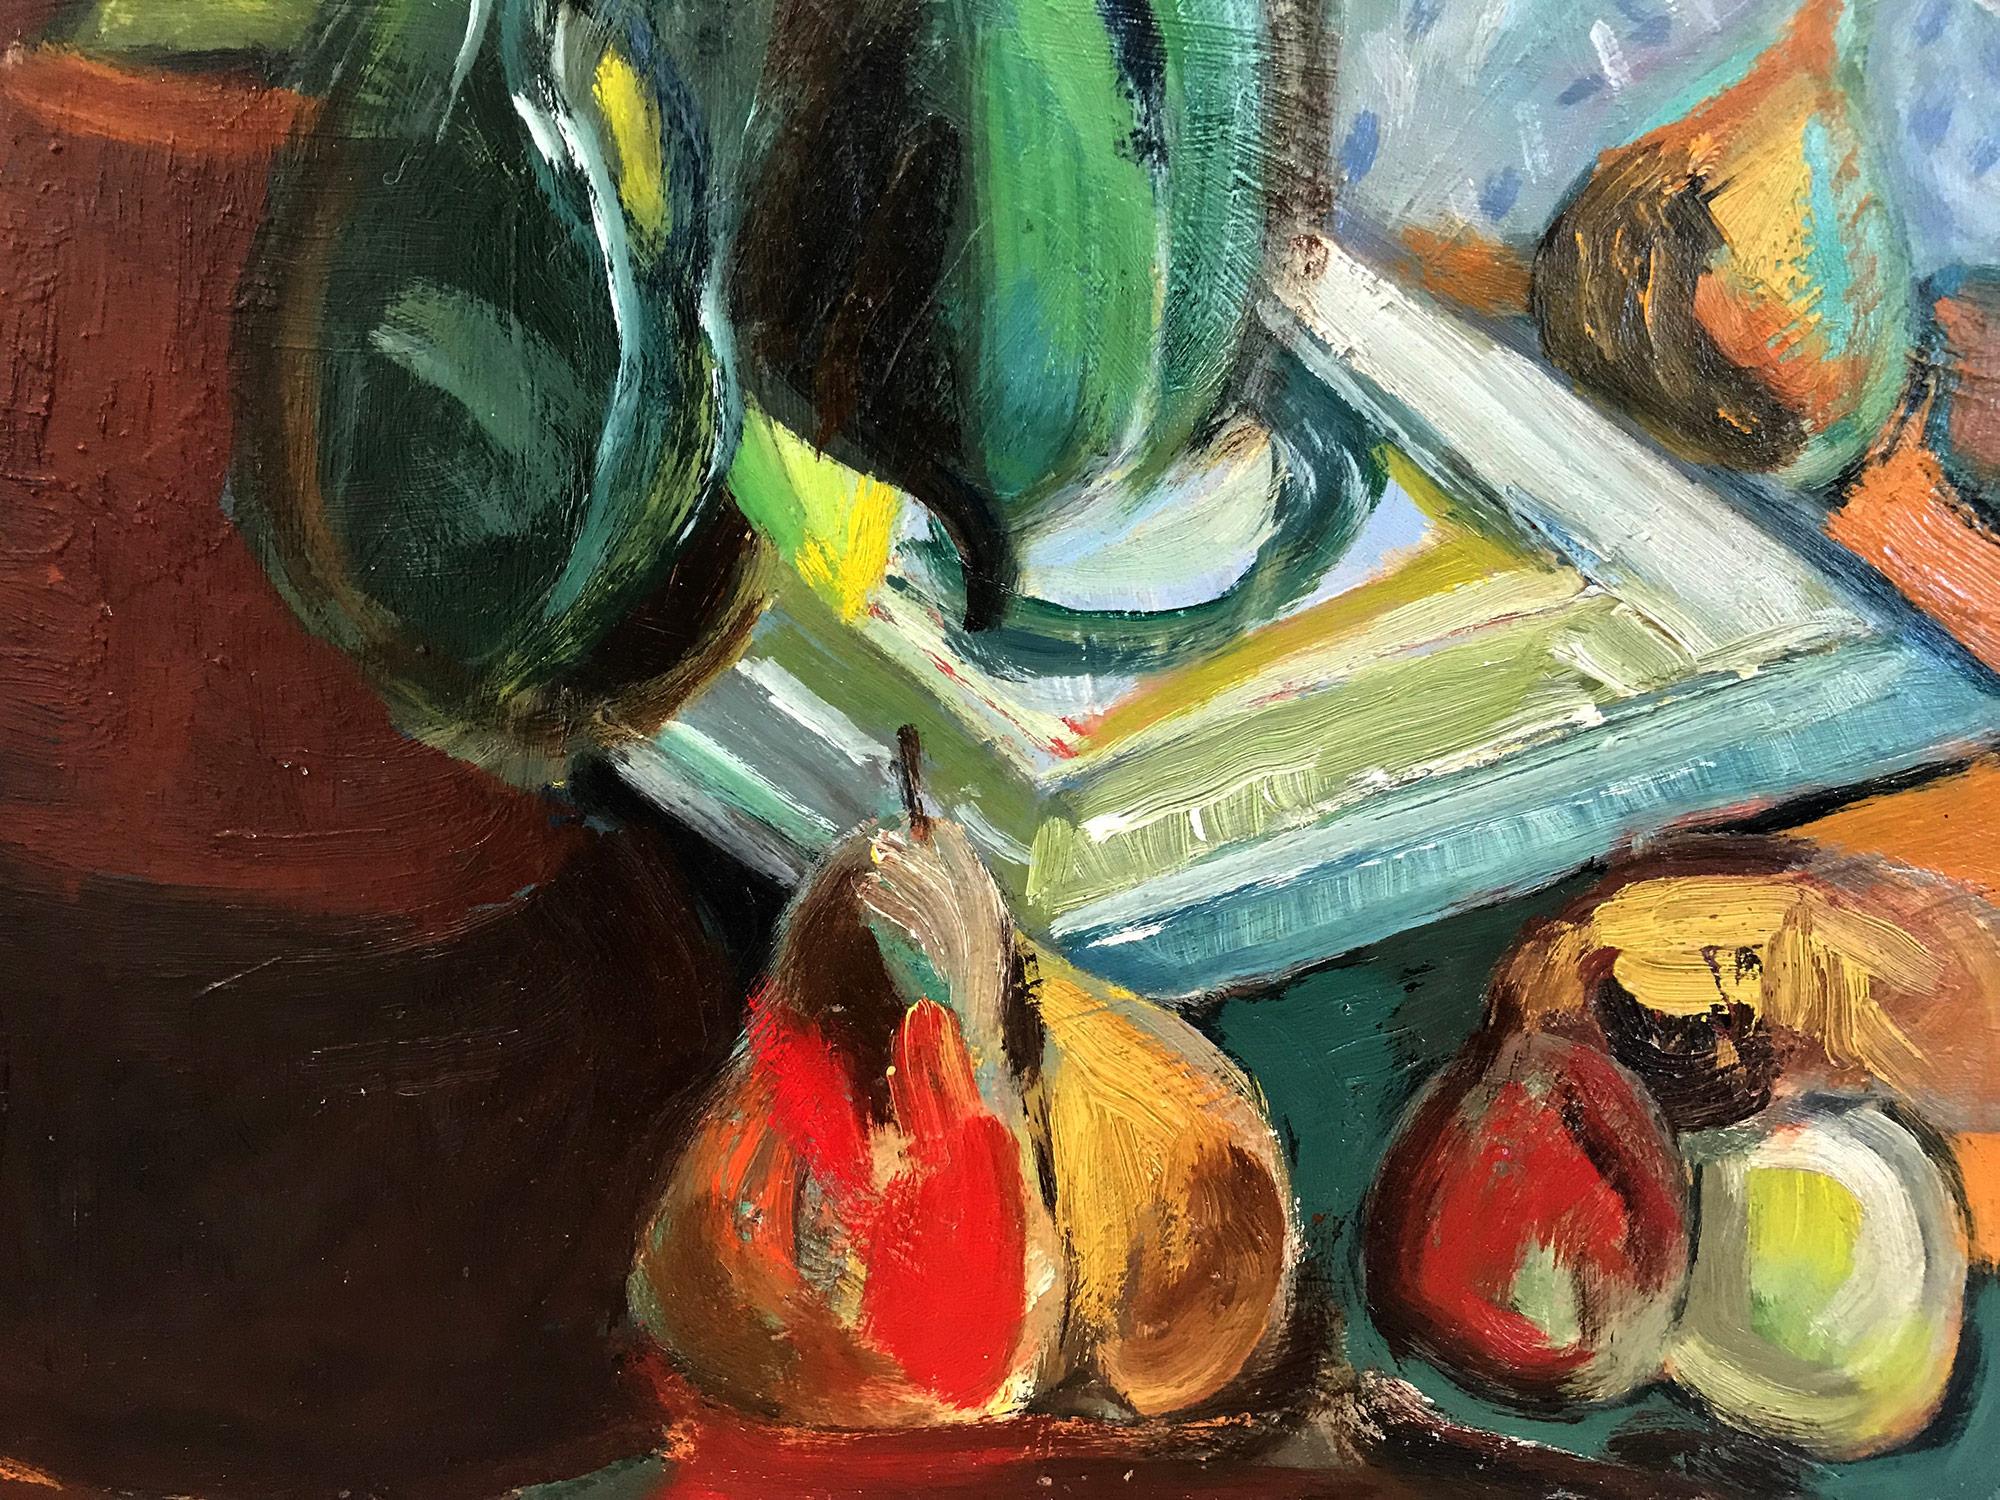 A strong modernist oil painting depicted in 1969 by Russian painter Michael Baxte. Mostly known for his abstracted figures on canvas or street scenes, this piece is a wonderful representation of his bold still life paintings, with expressive use of